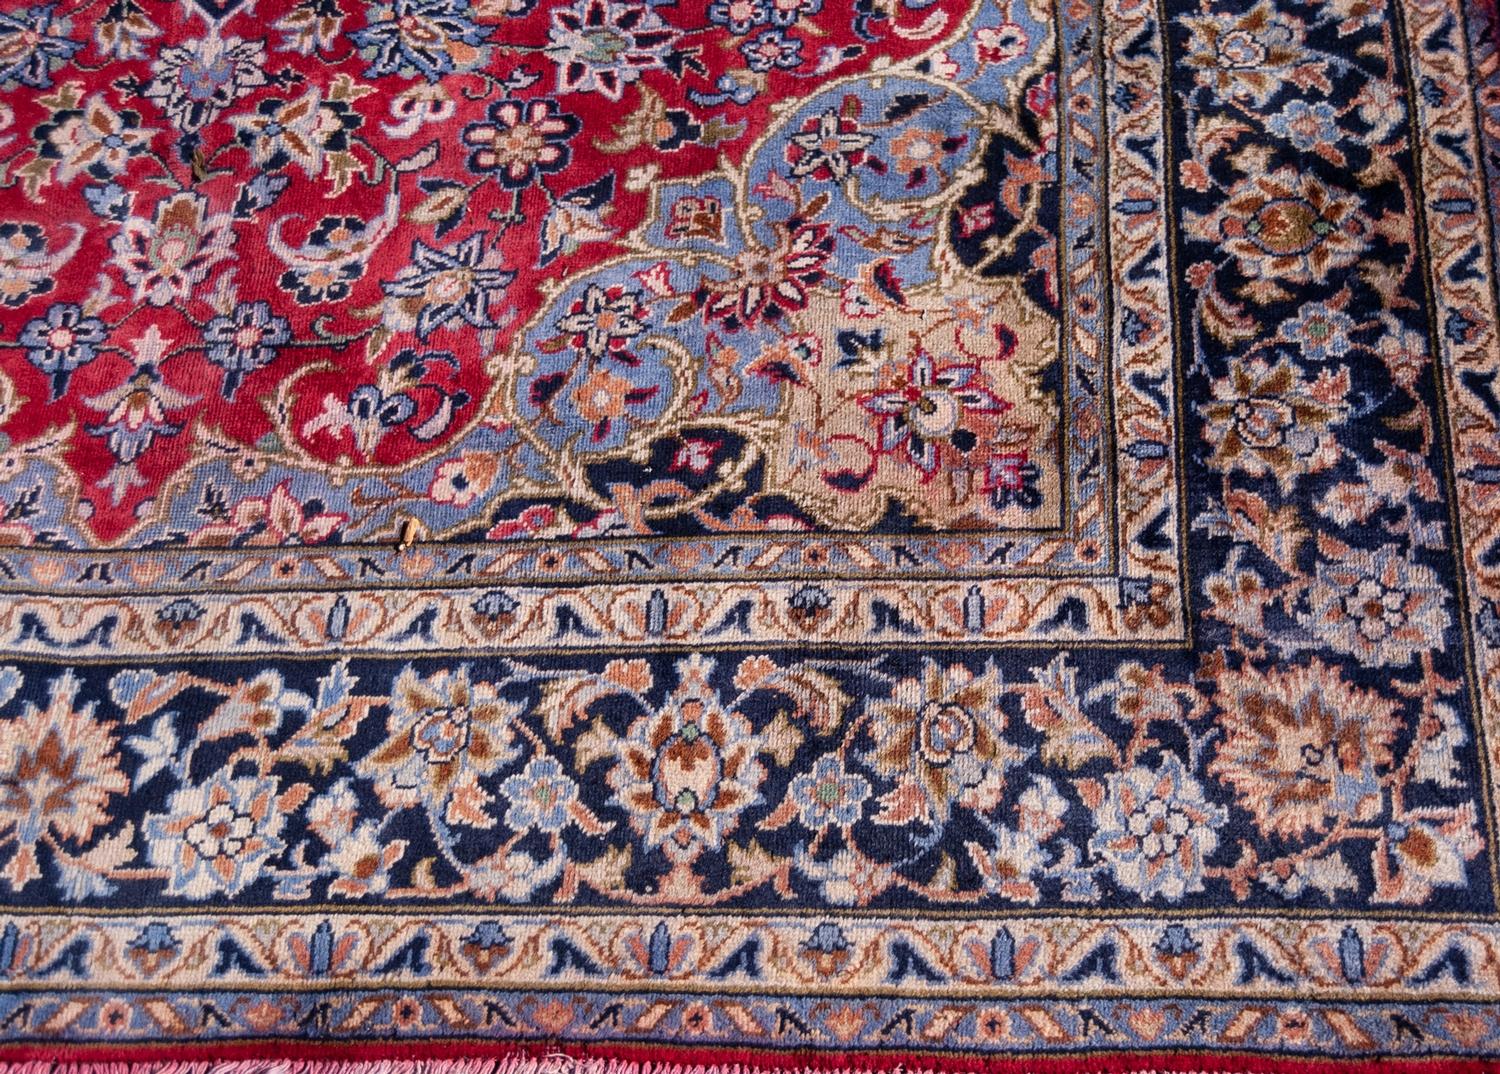 KIRMAN PERSIAN HAND-MADE CARPET with circular petal form centre medallion in midnight blue with - Image 2 of 3